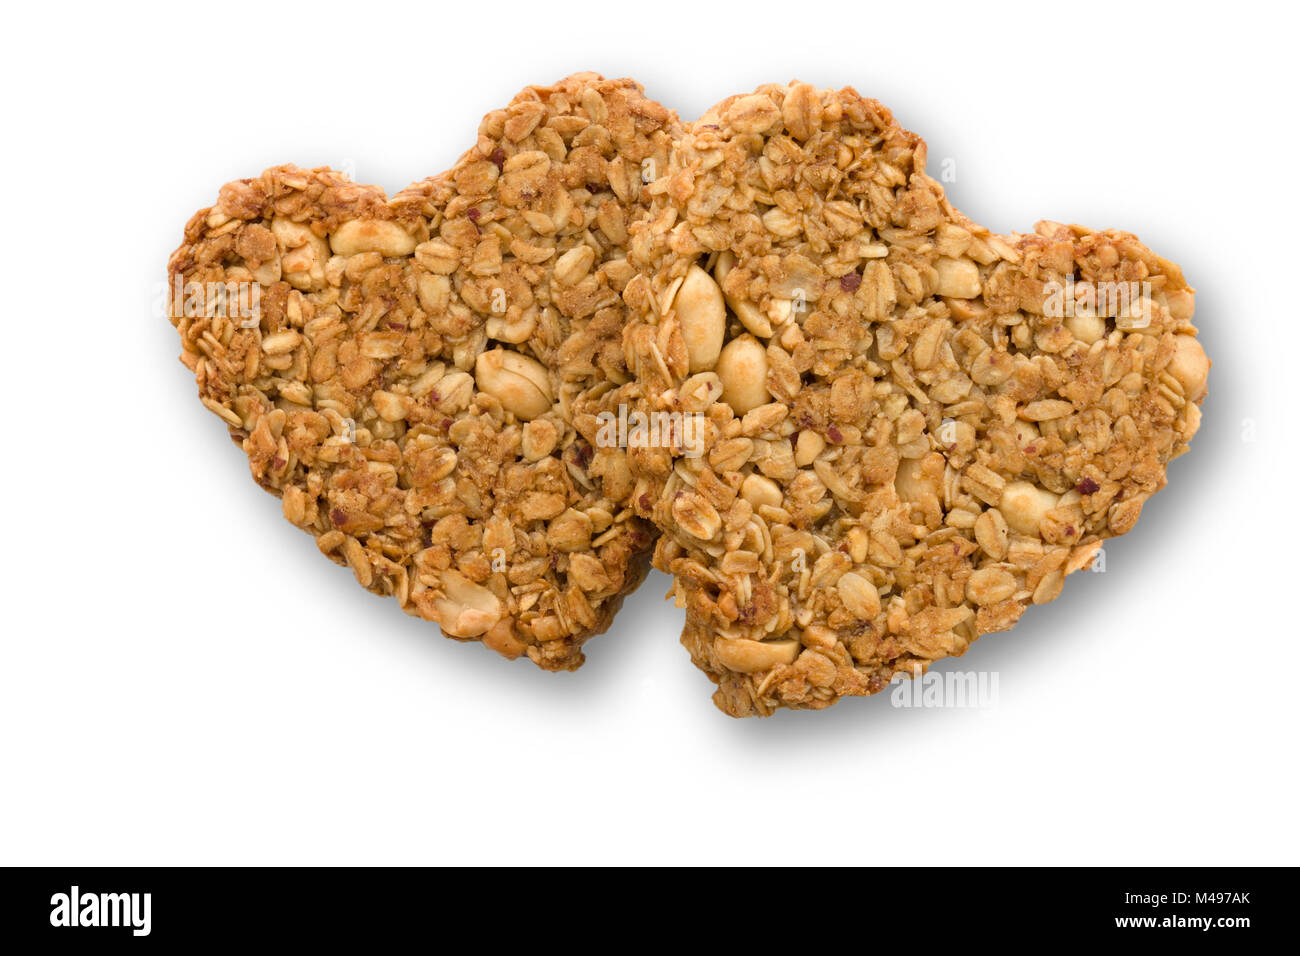 Two home-baked heart shaped peanut and oat flapjack biscuits made for Valentines day on white background. Stock Photo